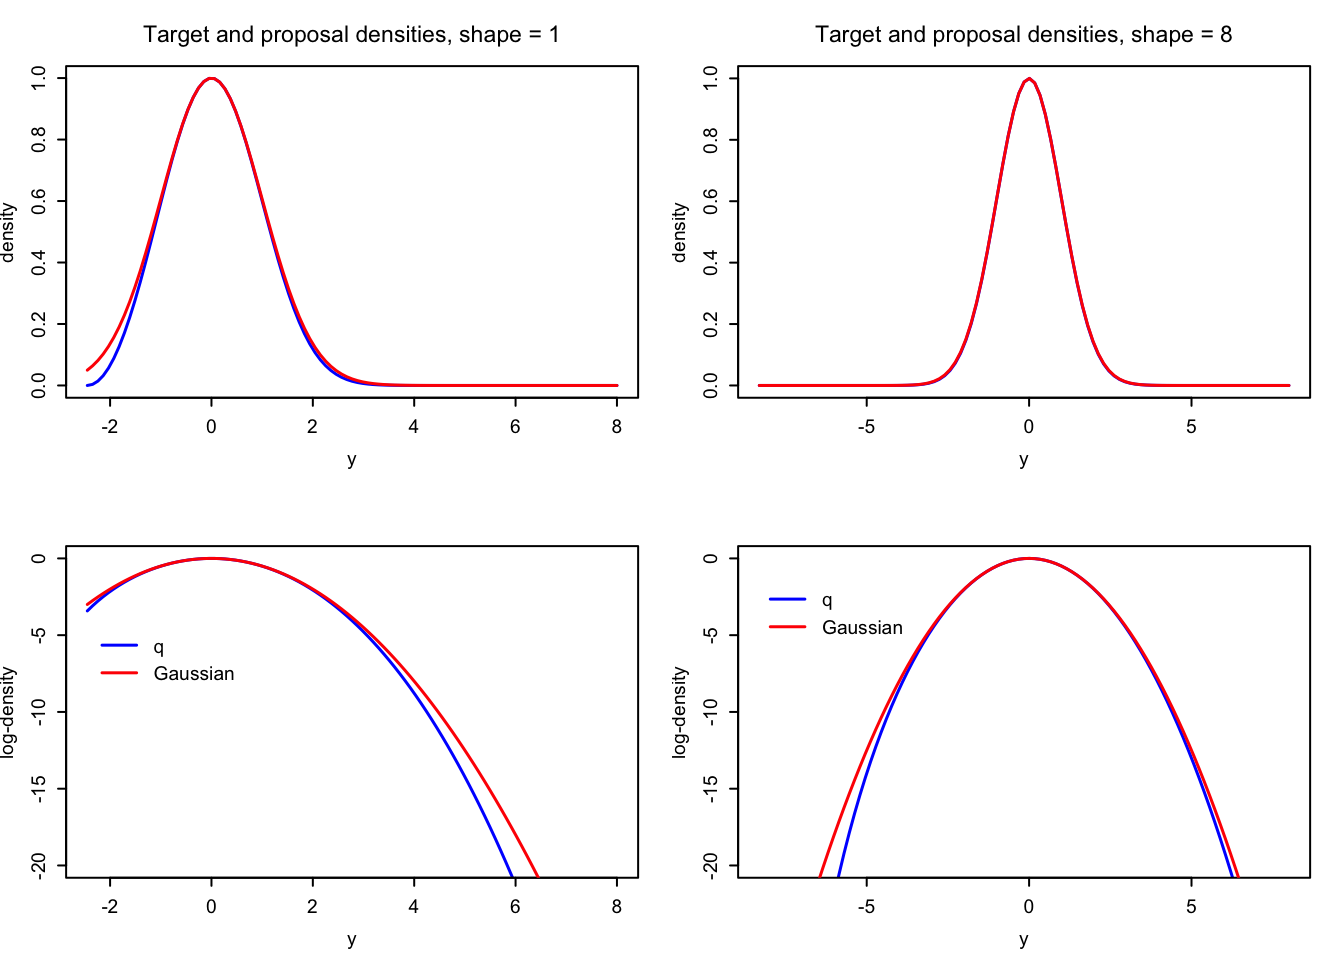 Comparisons of the Gaussian proposal (red) and the target density (blue) used for eventually simulating gamma distributed variables via a transformation.